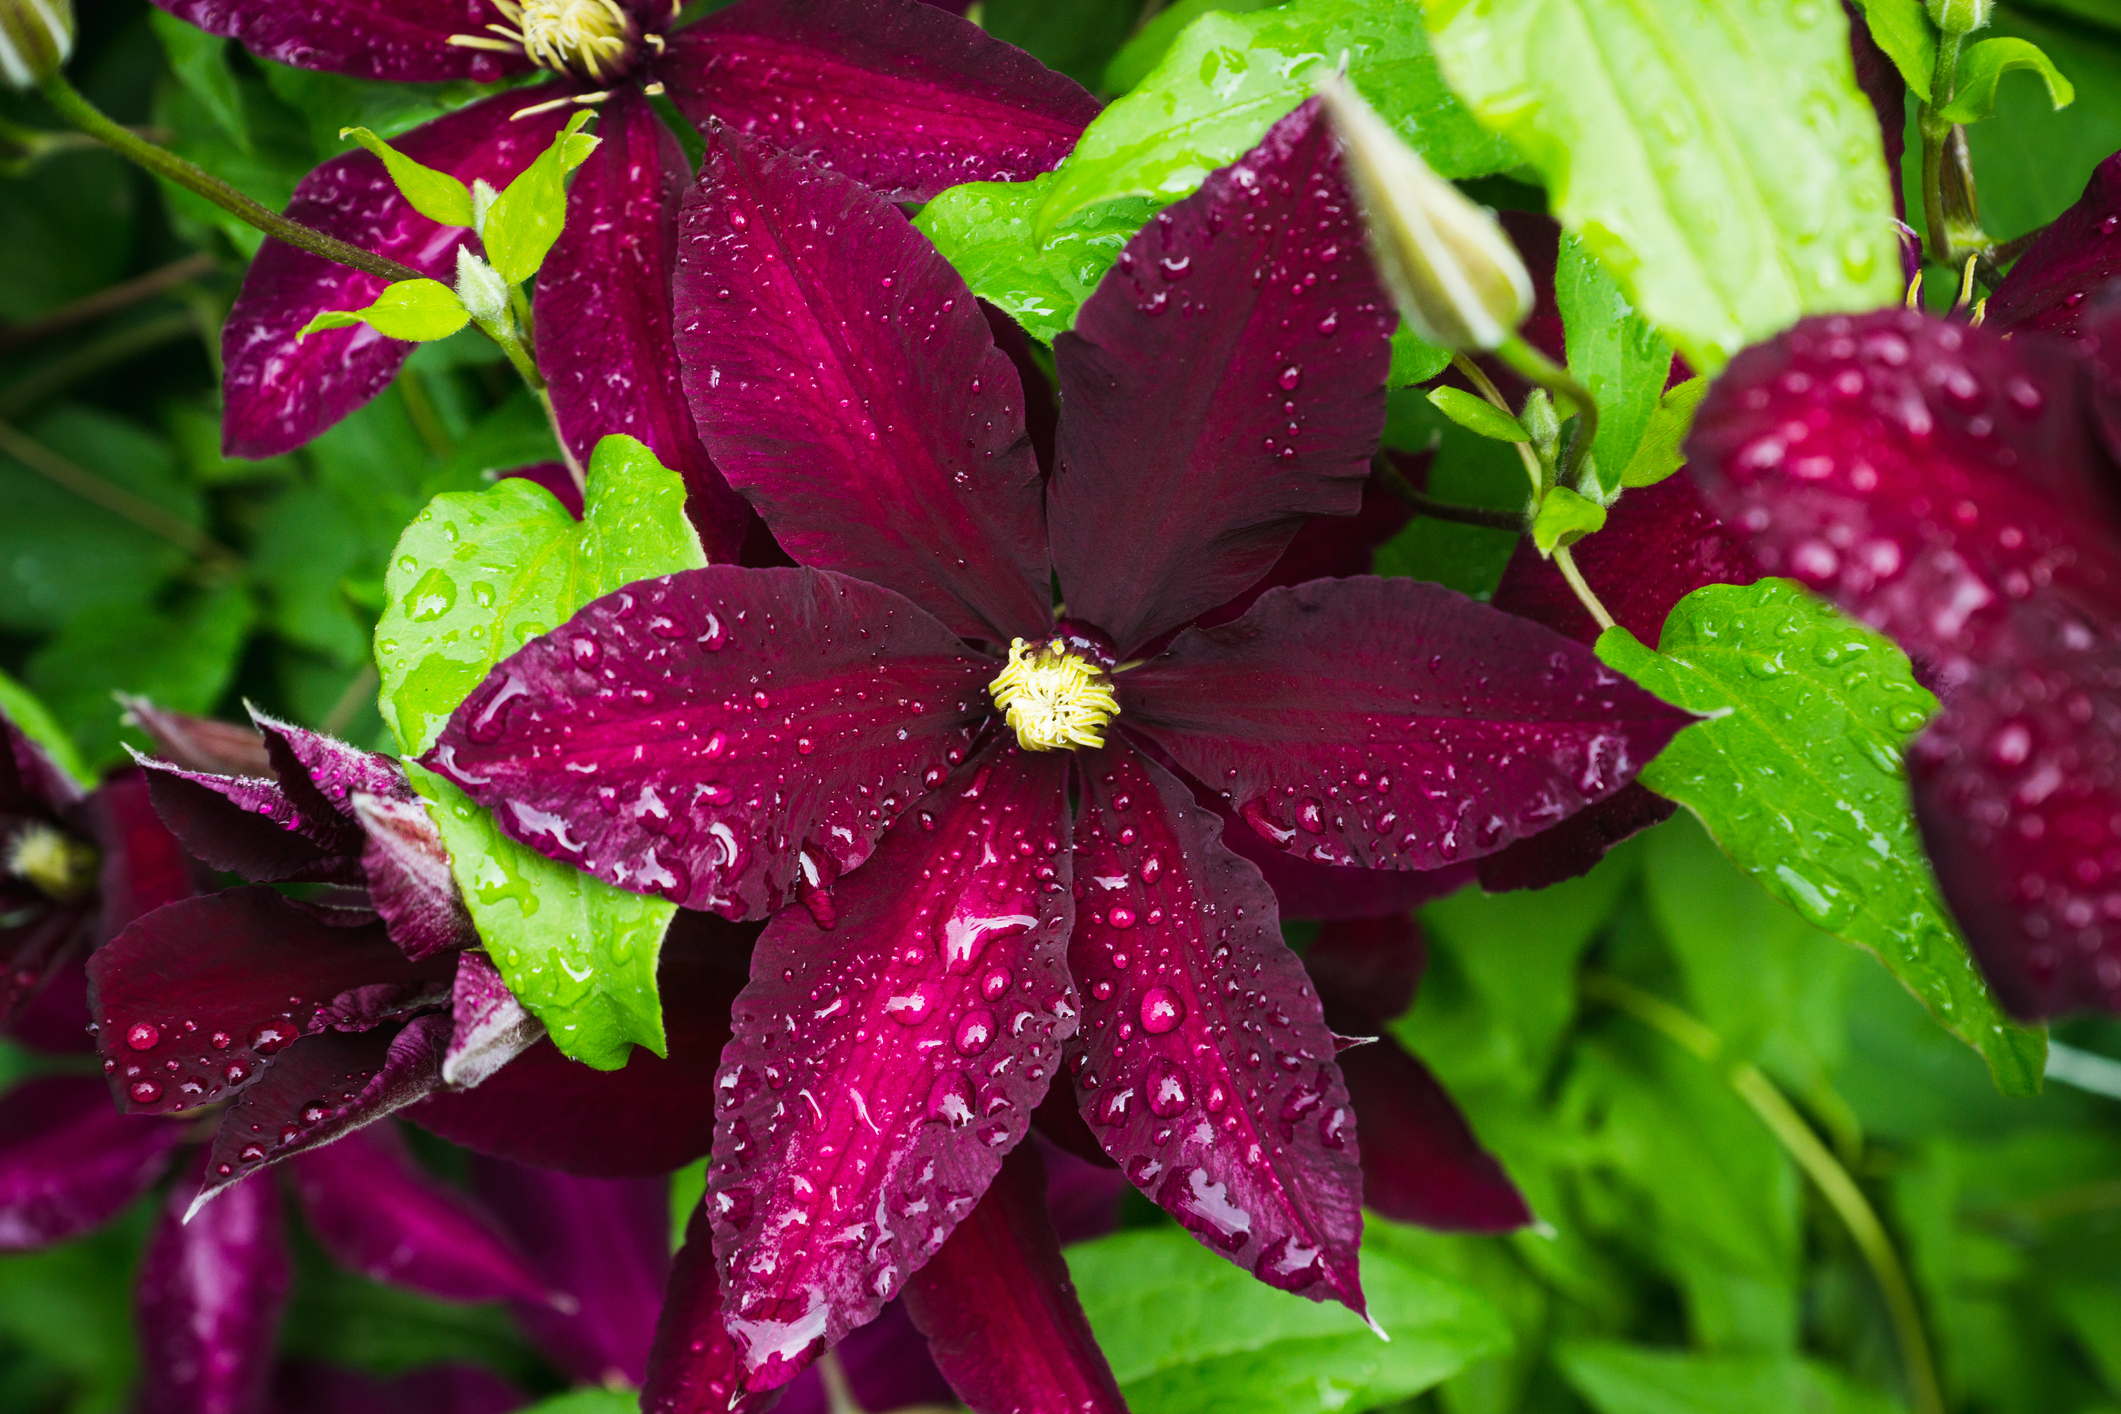 Clematis ‘Niobe’ is a good one to pair with ‘Jackmanii’ since their pruning needs are the same. It blooms on old and new wood. When pruning these two together, it is easier to prune without the need to separate them first.